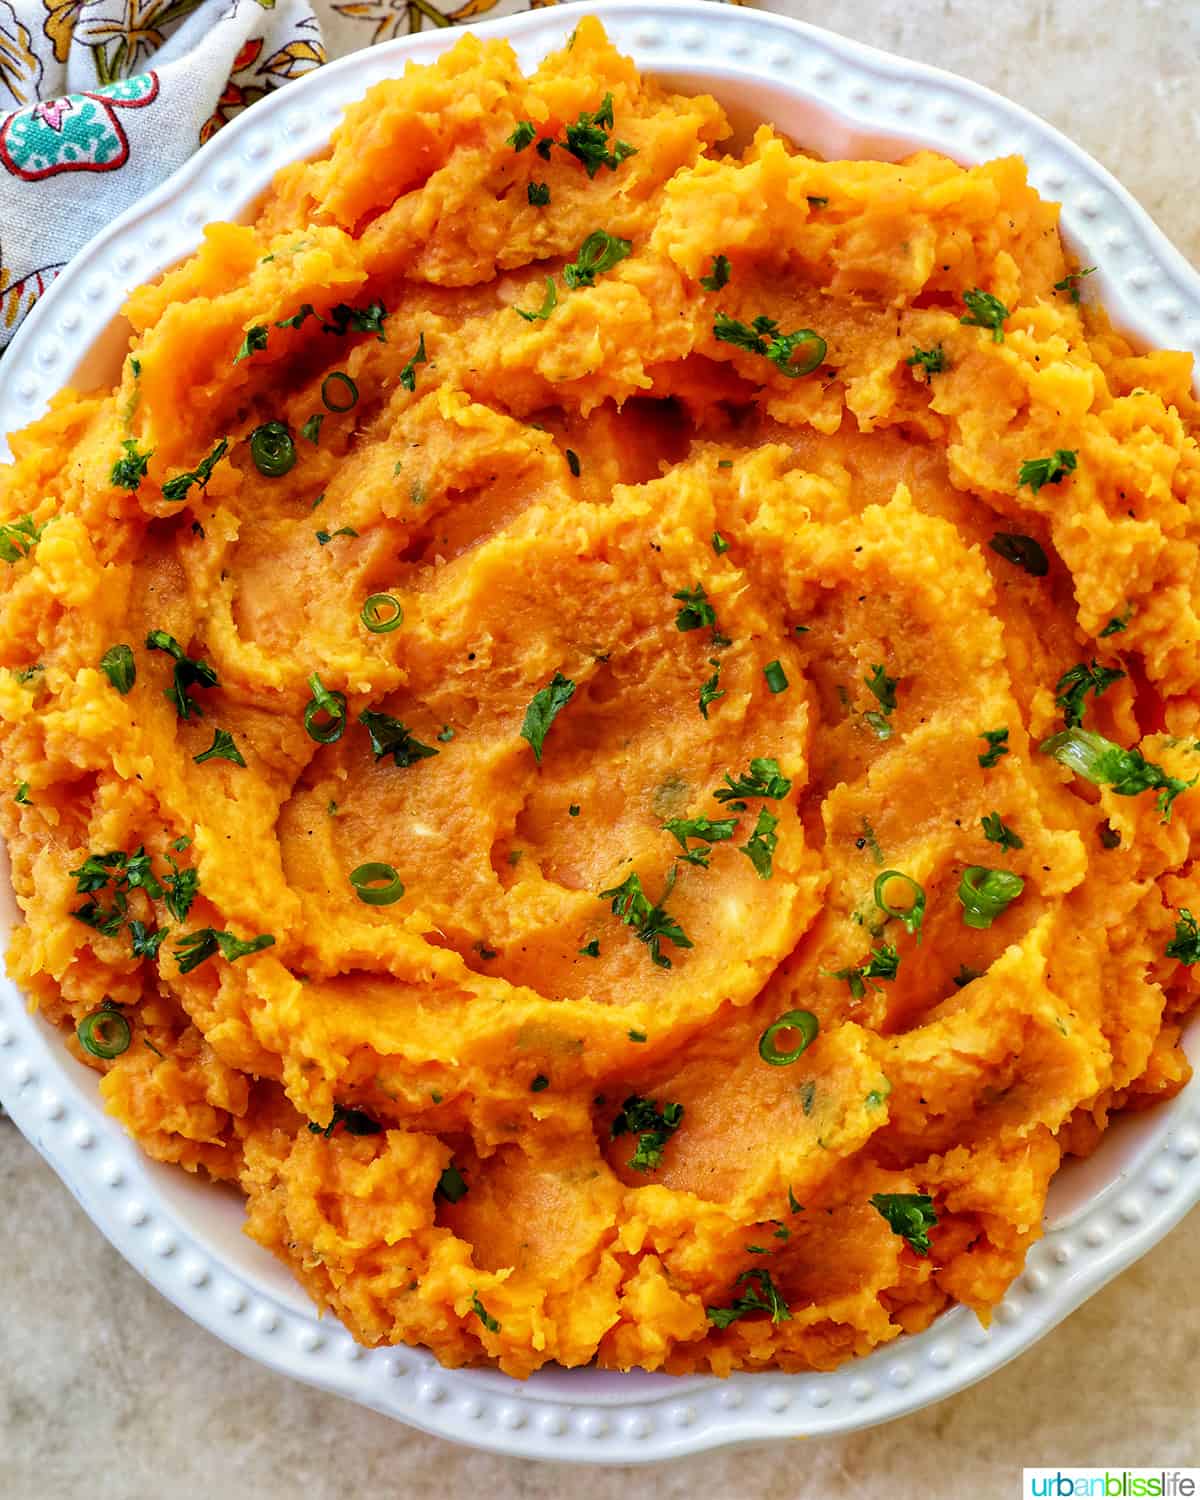 big white bowl full of mashed sweet potatoes and garnished with fresh herbs.